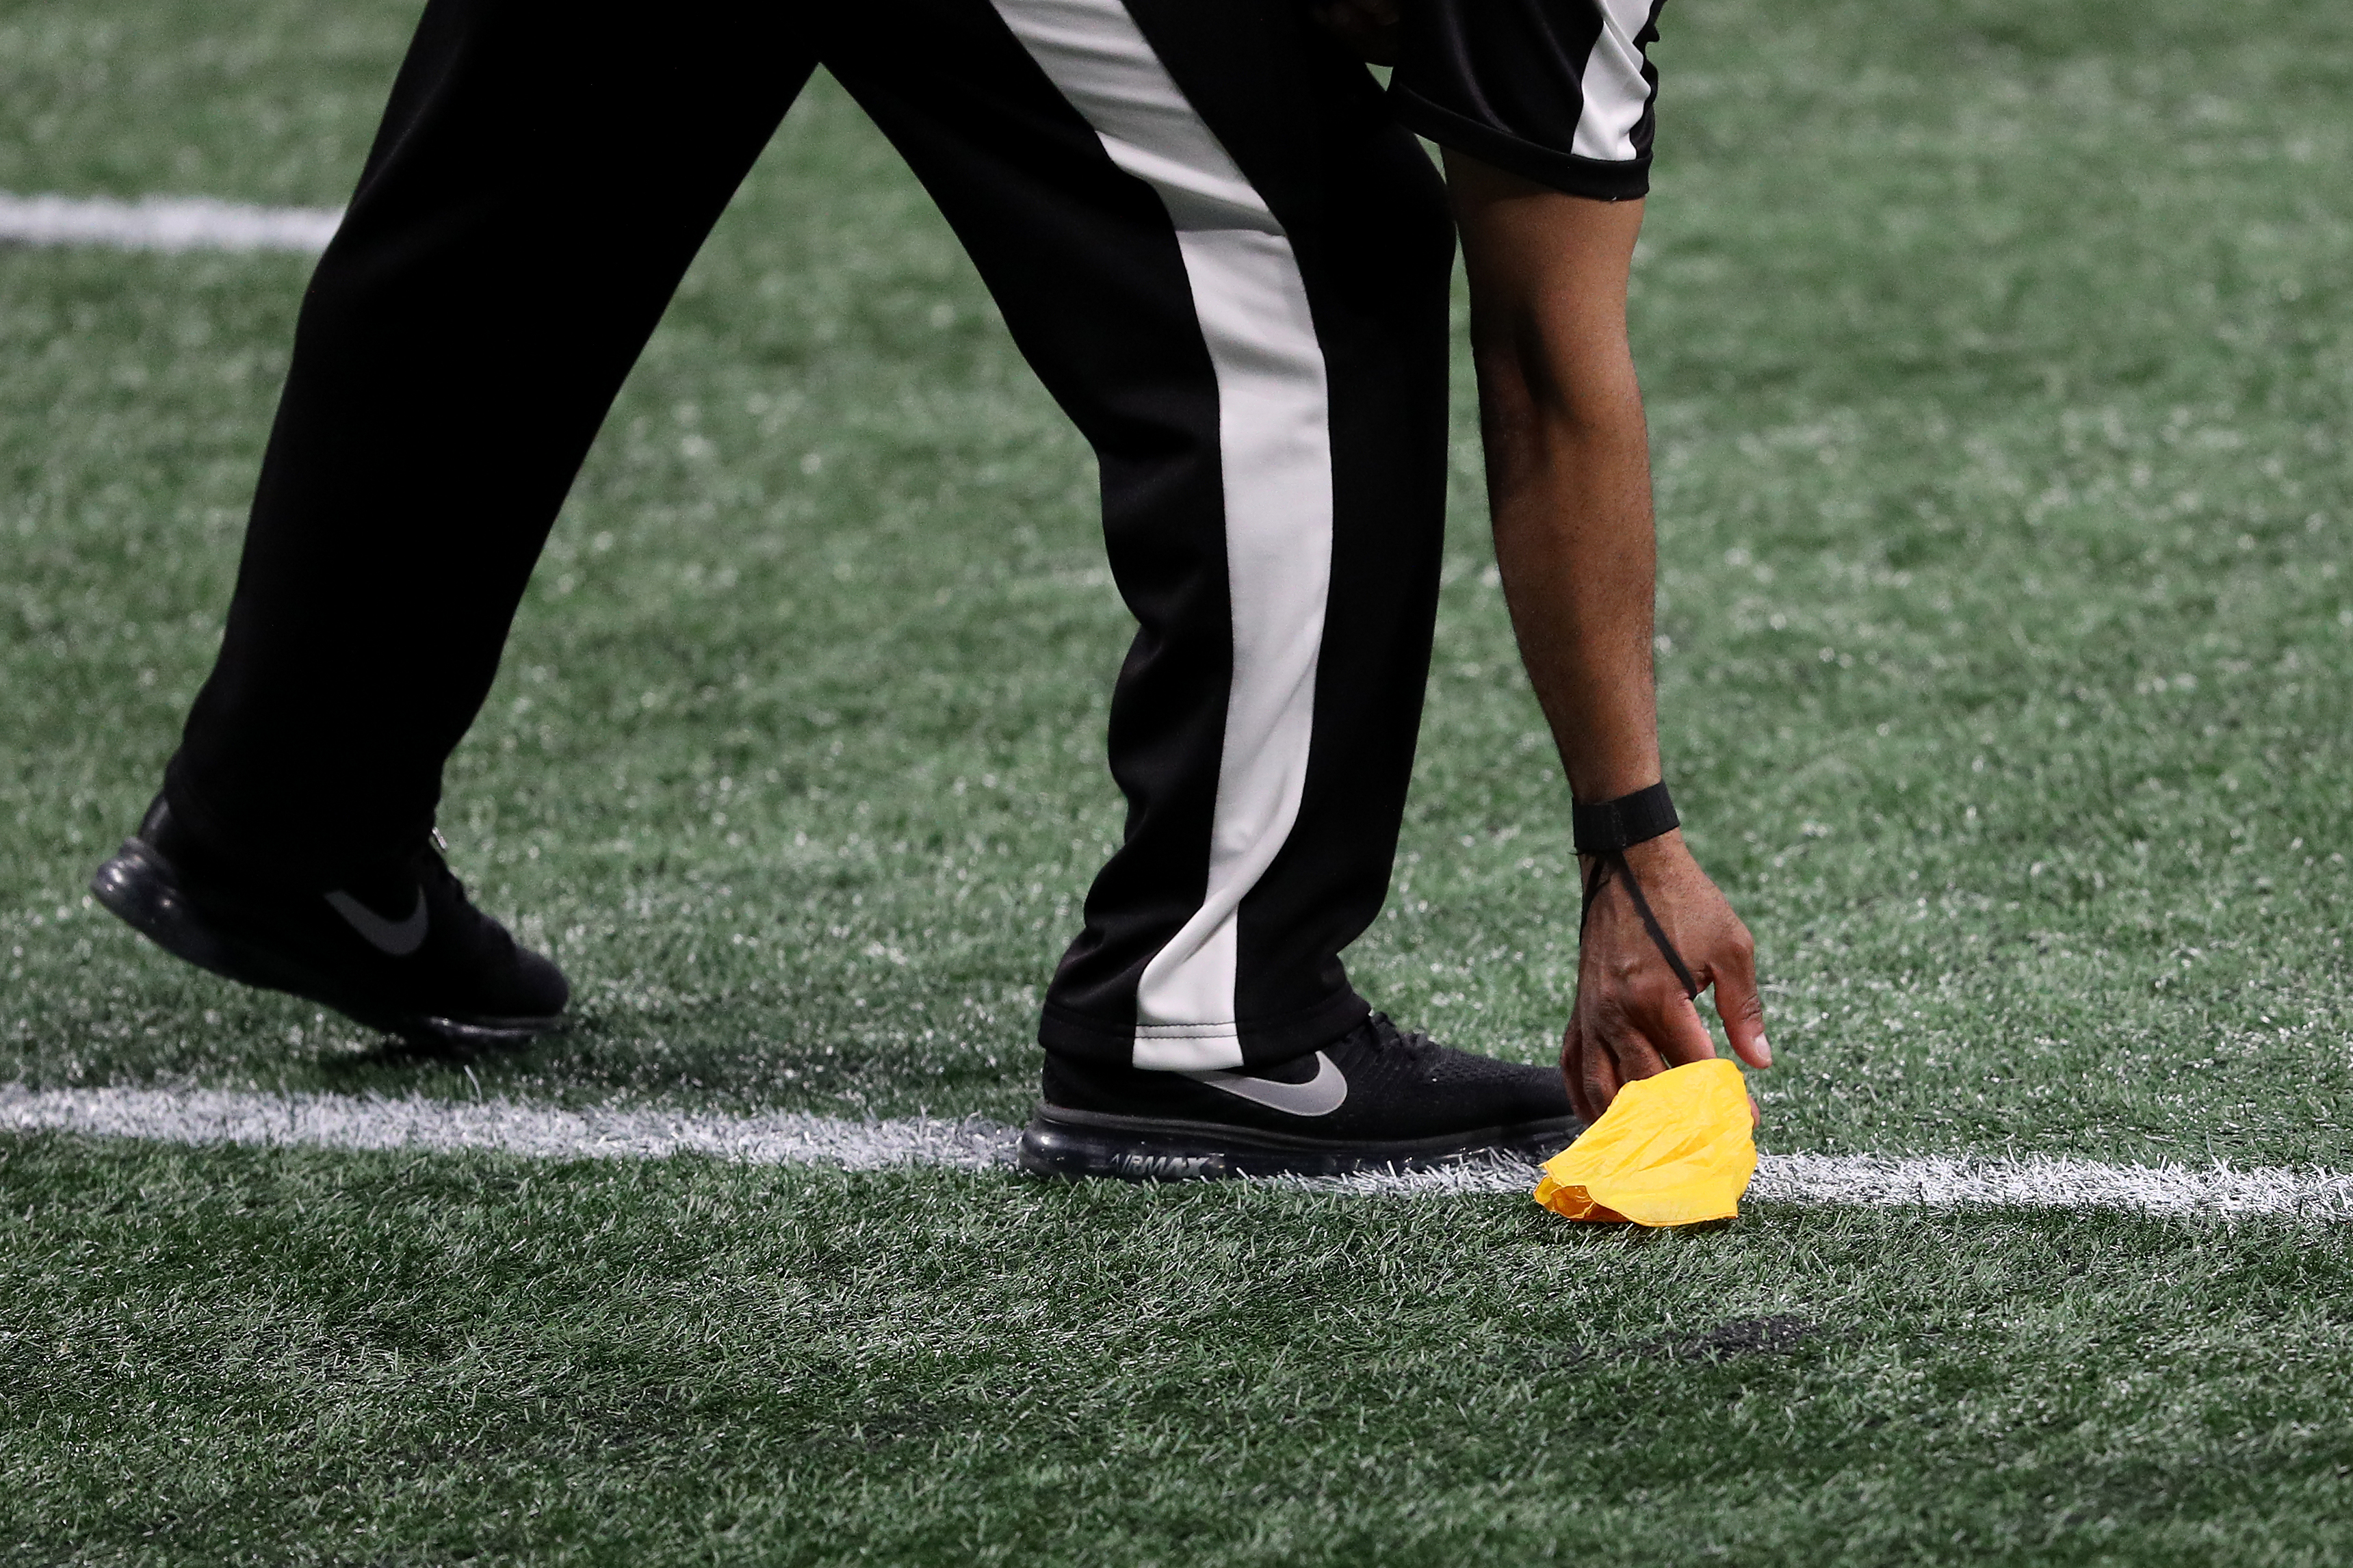 A referee picks up a flag in the first quarter during Super Bowl LIII between the Los Angeles Rams and New England Patriots, Feb. 3, 2019.